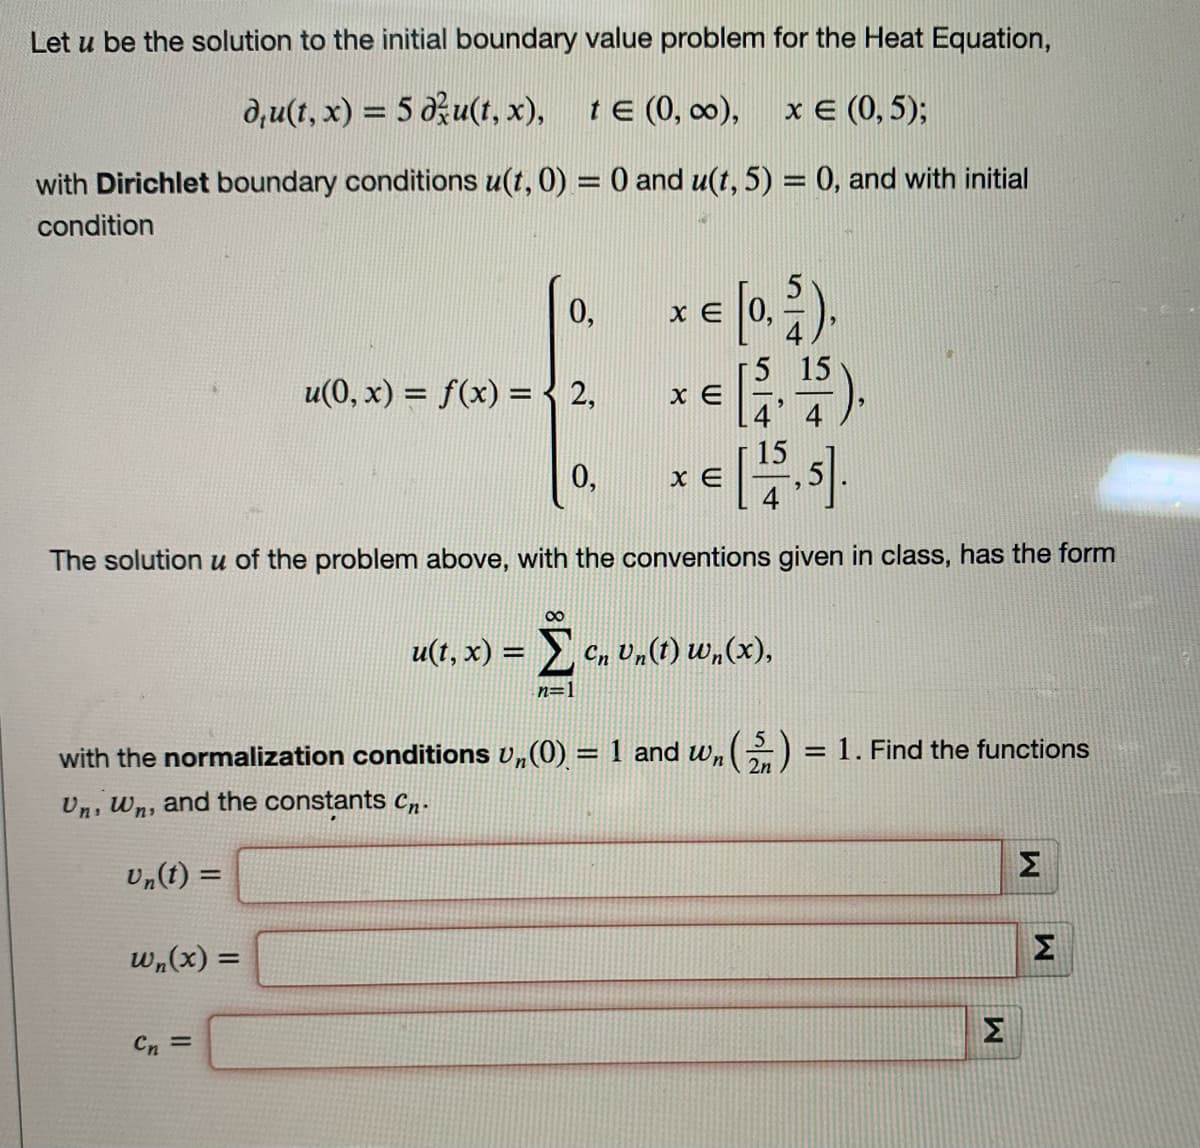 Let u be the solution to the initial boundary value problem for the Heat Equation,
du(t, x) = 5 du(t, x),
t € (0, ∞0),
x € (0,5);
with Dirichlet boundary conditions u(t,0) = 0 and u(t, 5) = 0, and with initial
condition
0,
15
u(0, x) = f(x) = 2,
= [0, 2),
= [5, ¹5).
€ [15.5].
0,
XE
The solution u of the problem above, with the conventions given in class, has the form
u(t, x) = Ï Cn Un(t) wn(x),
n=1
with the normalization conditions U,(0) = 1 and wn (5) = 1. Find the functions
Un, Wn, and the constants Cn.
Un(t) =
wn(x) =
Cn =
x E
XE
M
M